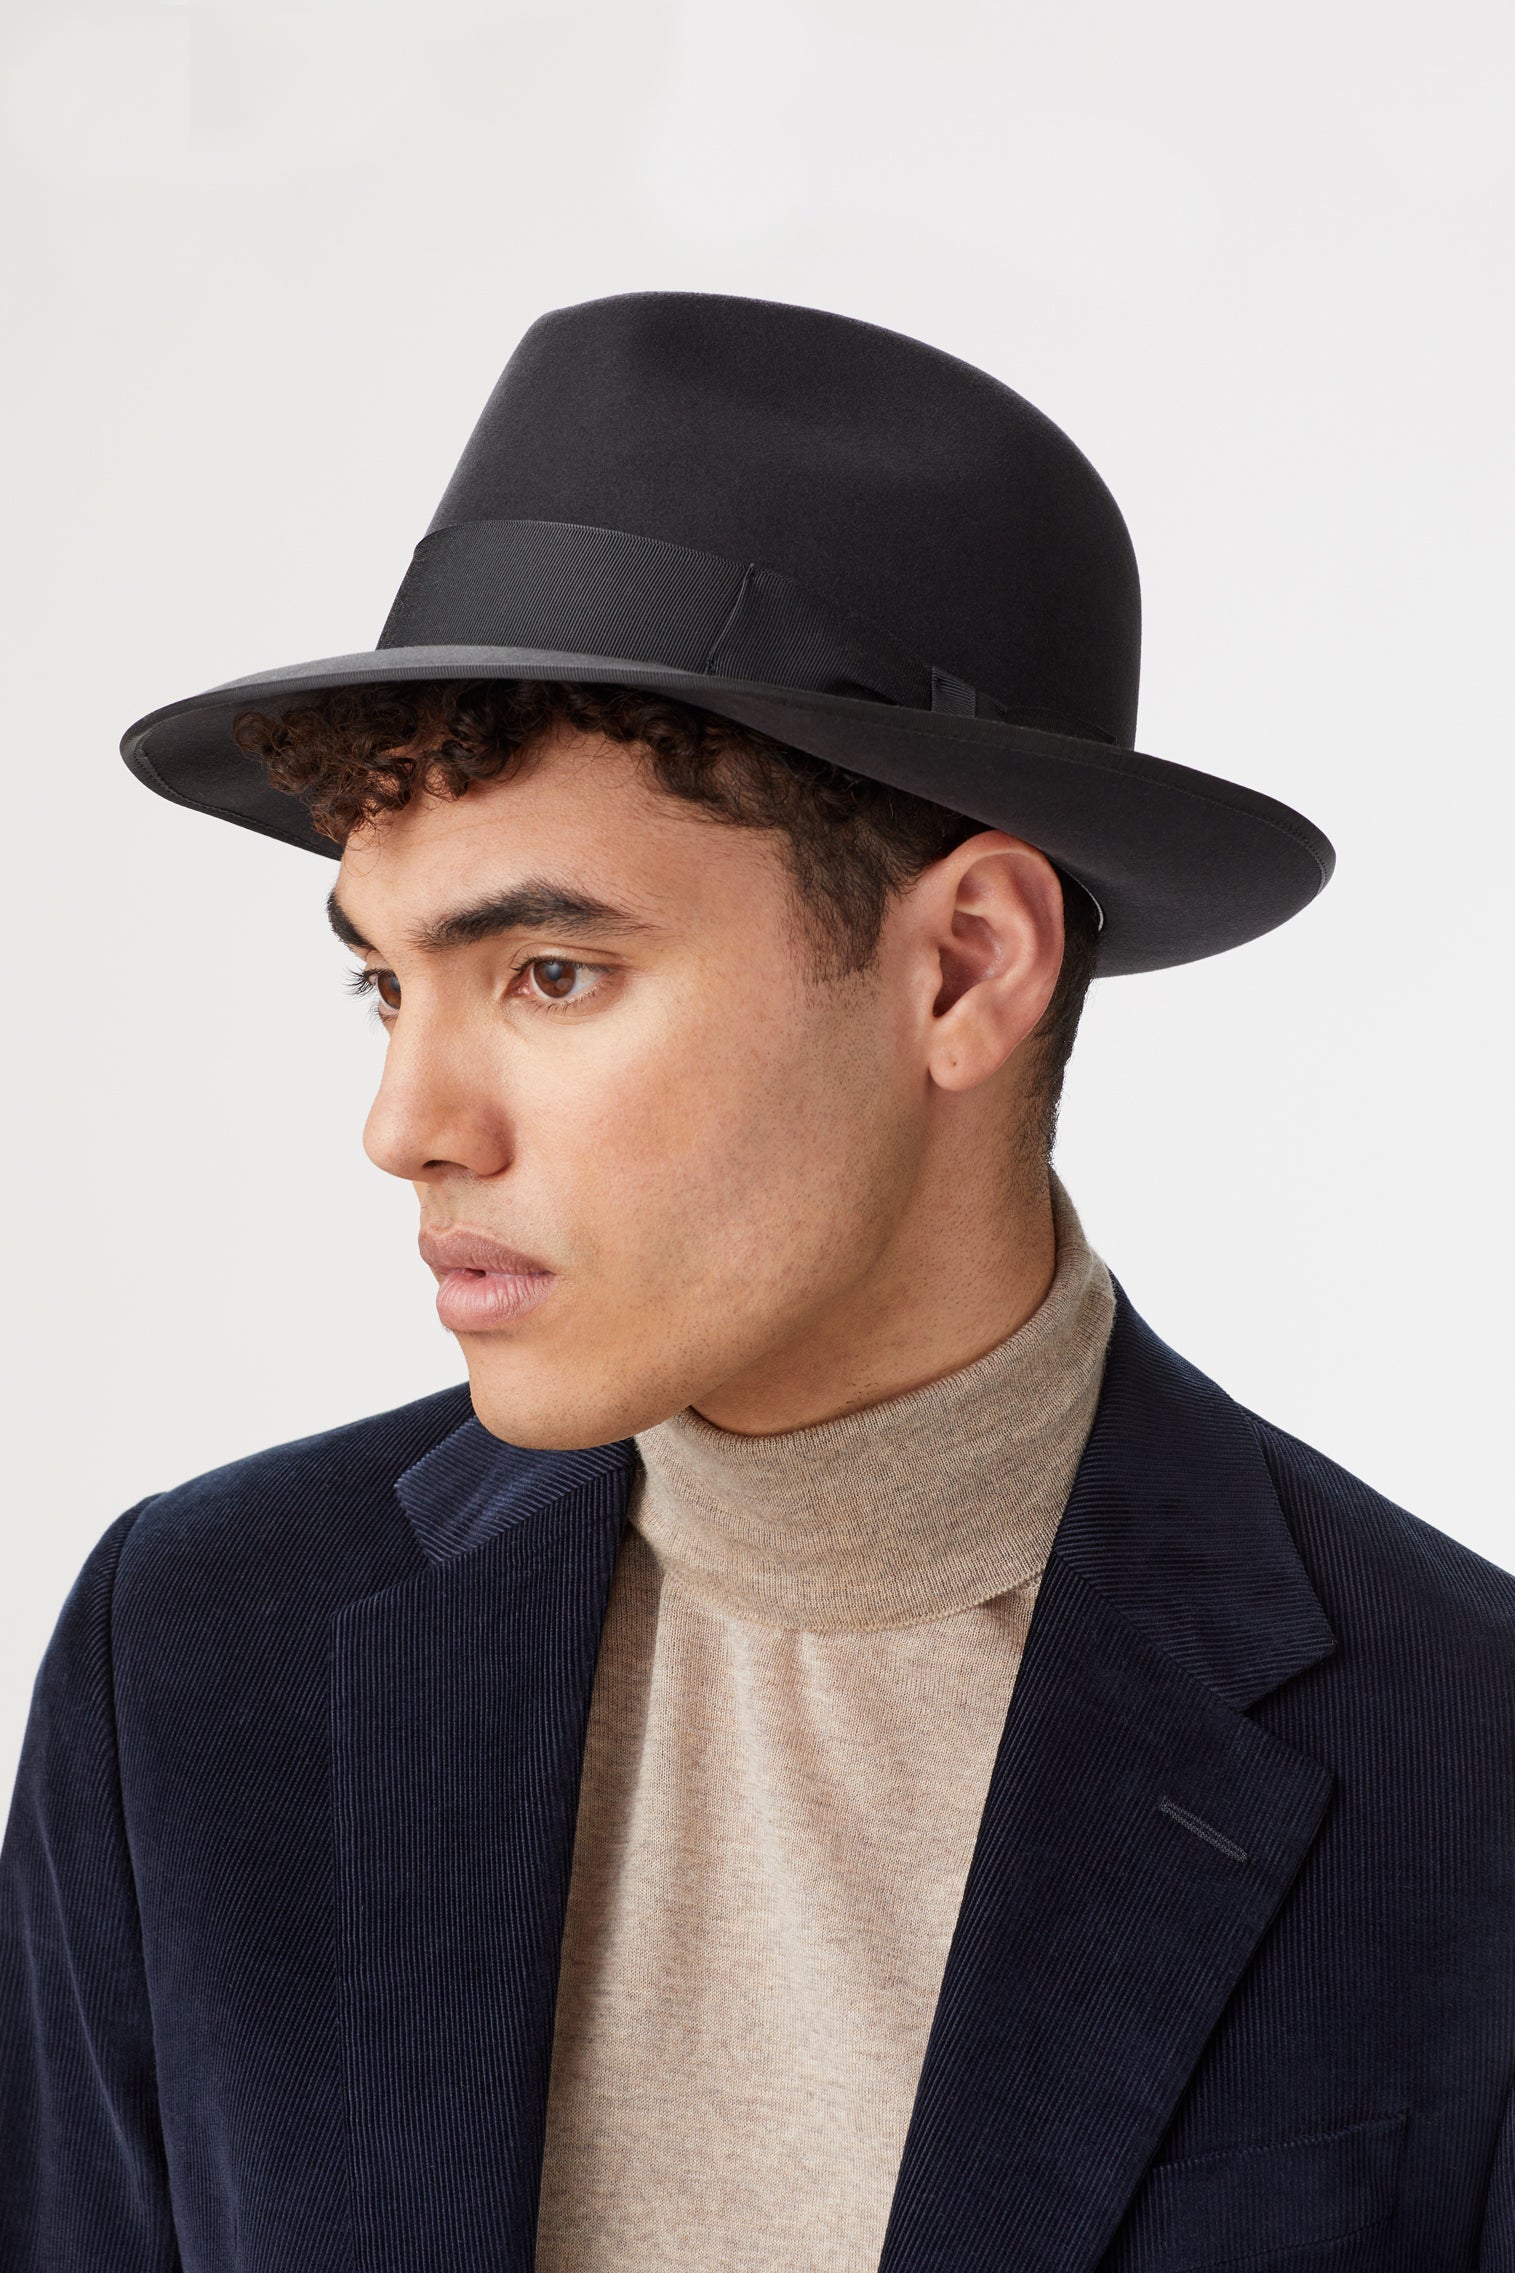 Escorial Wool Albany Trilby - Hats for Heart-shaped Face Shapes - Lock & Co. Hatters London UK